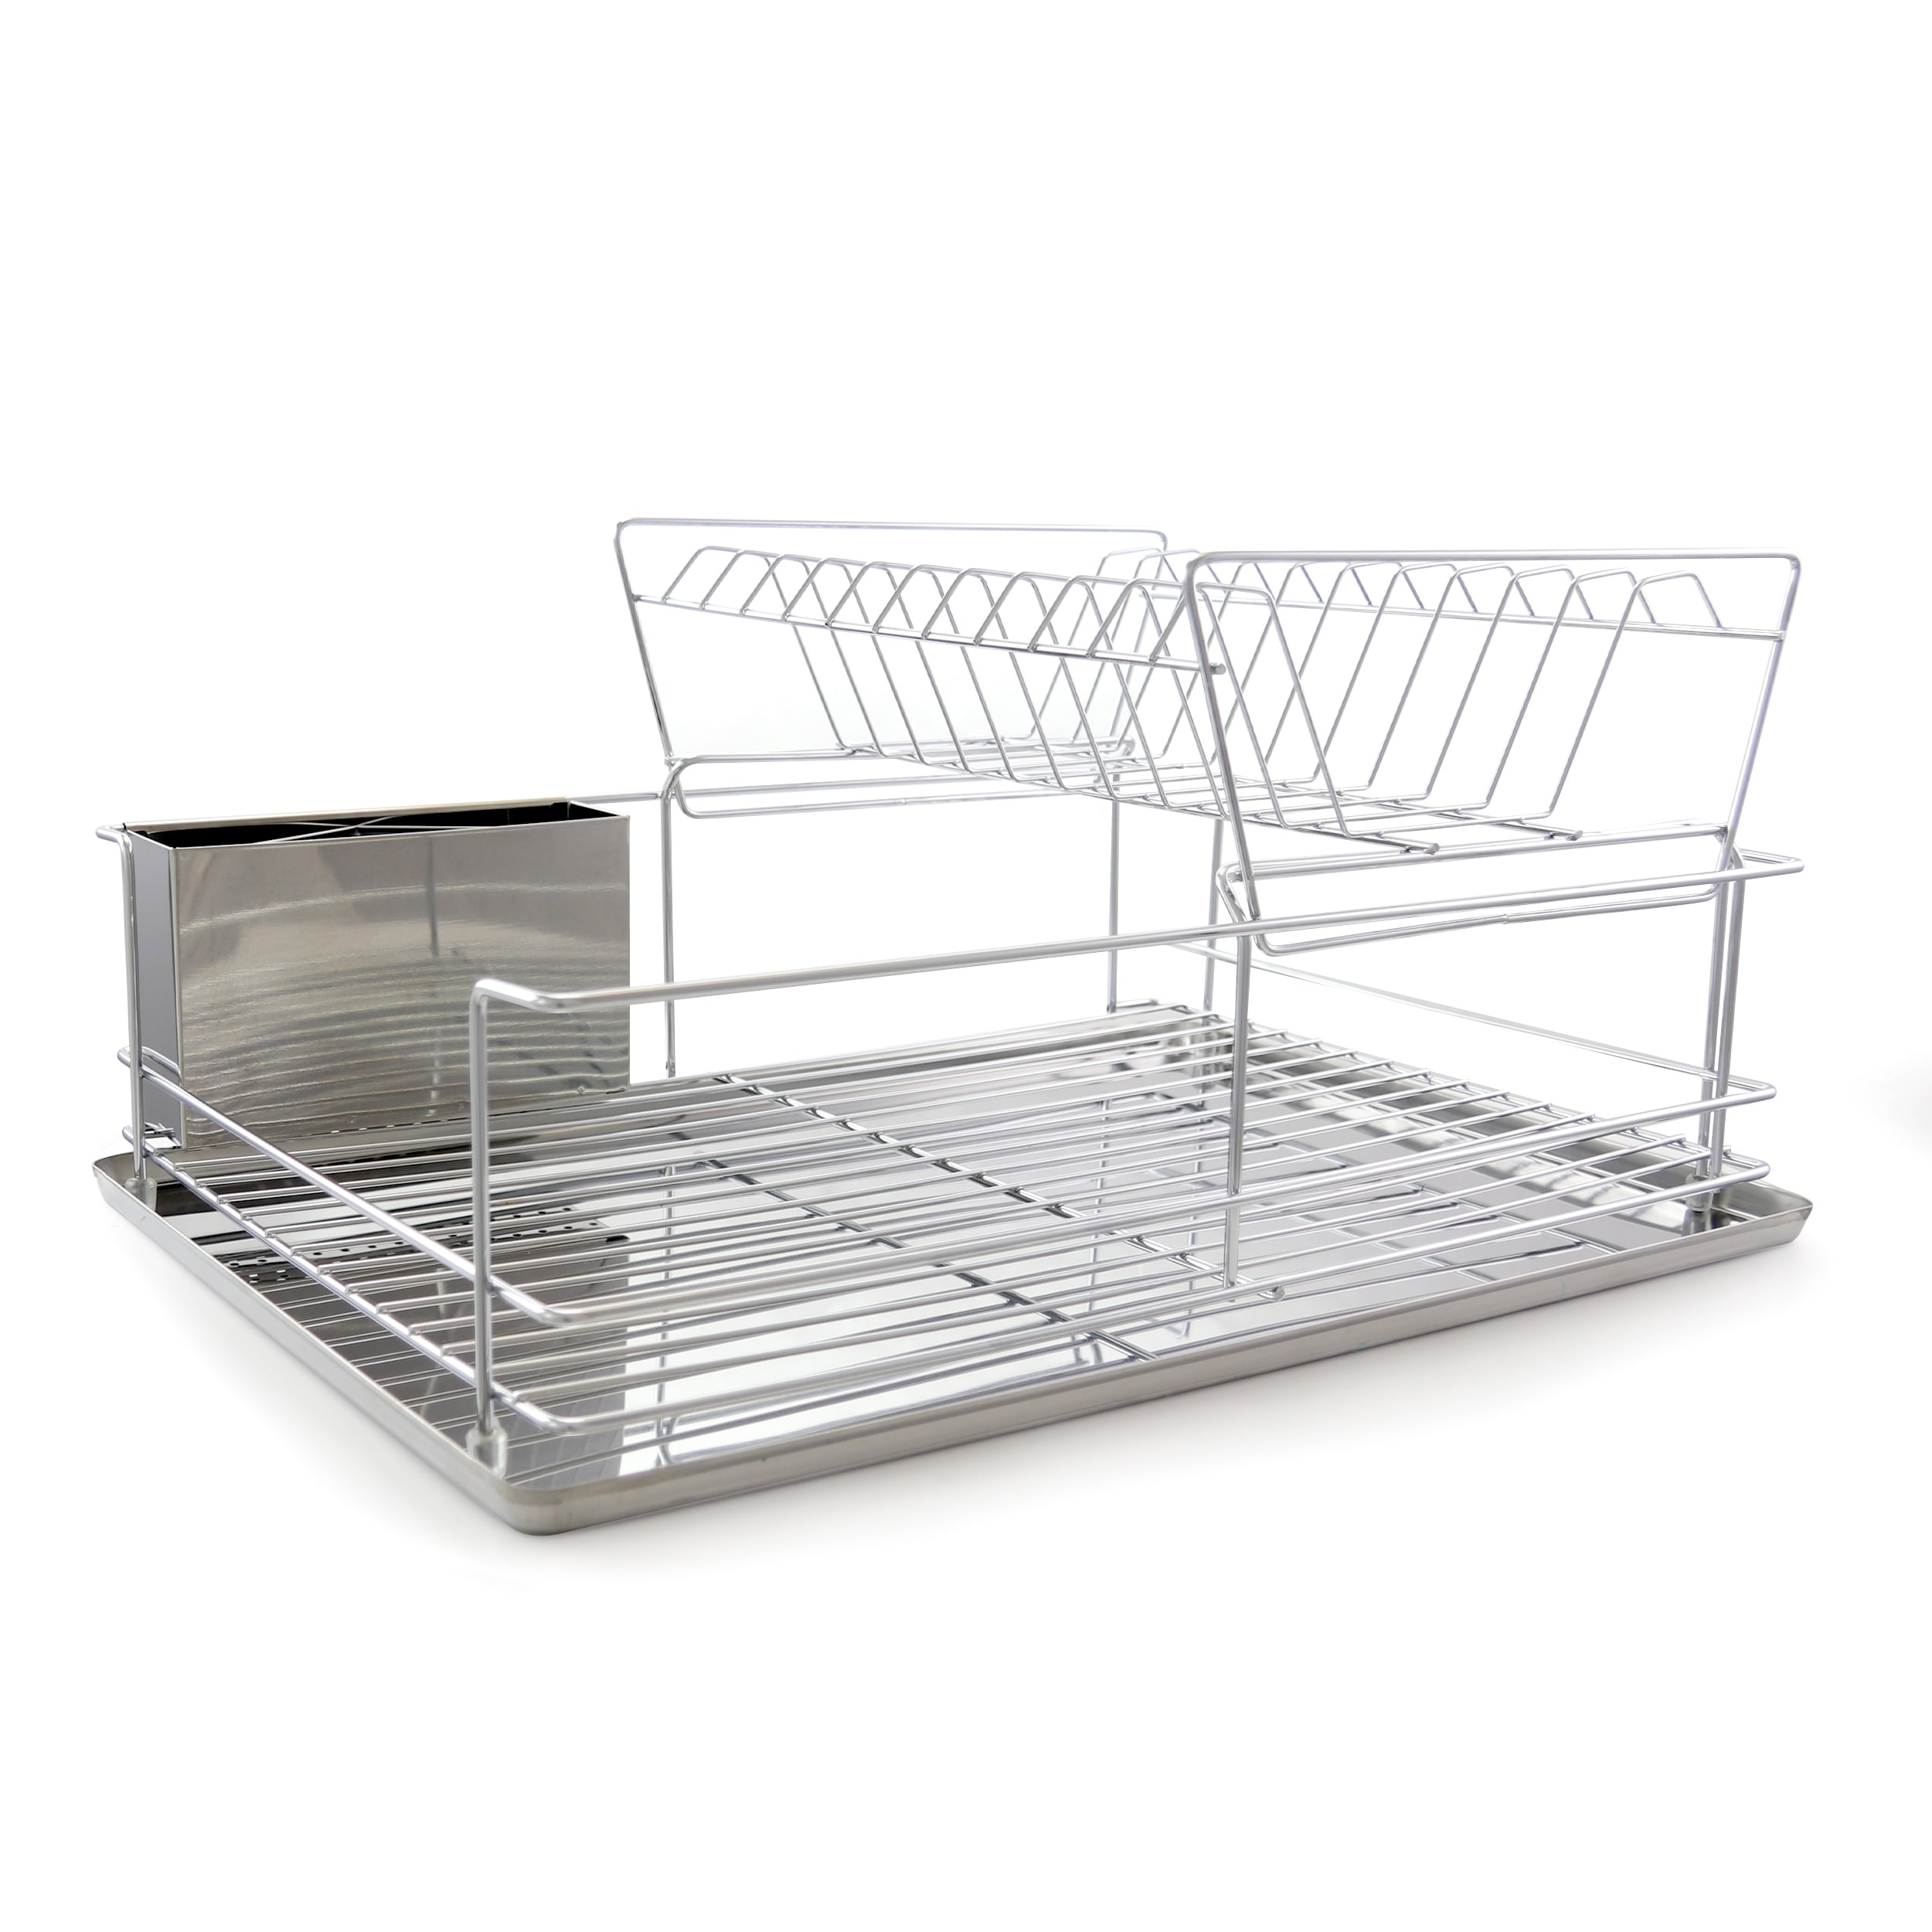 https://ak1.ostkcdn.com/images/products/is/images/direct/271181471790a20bbaa4eab95918e161349d1a4a/Better-Chef-22-Inch-Dish-Rack.jpg